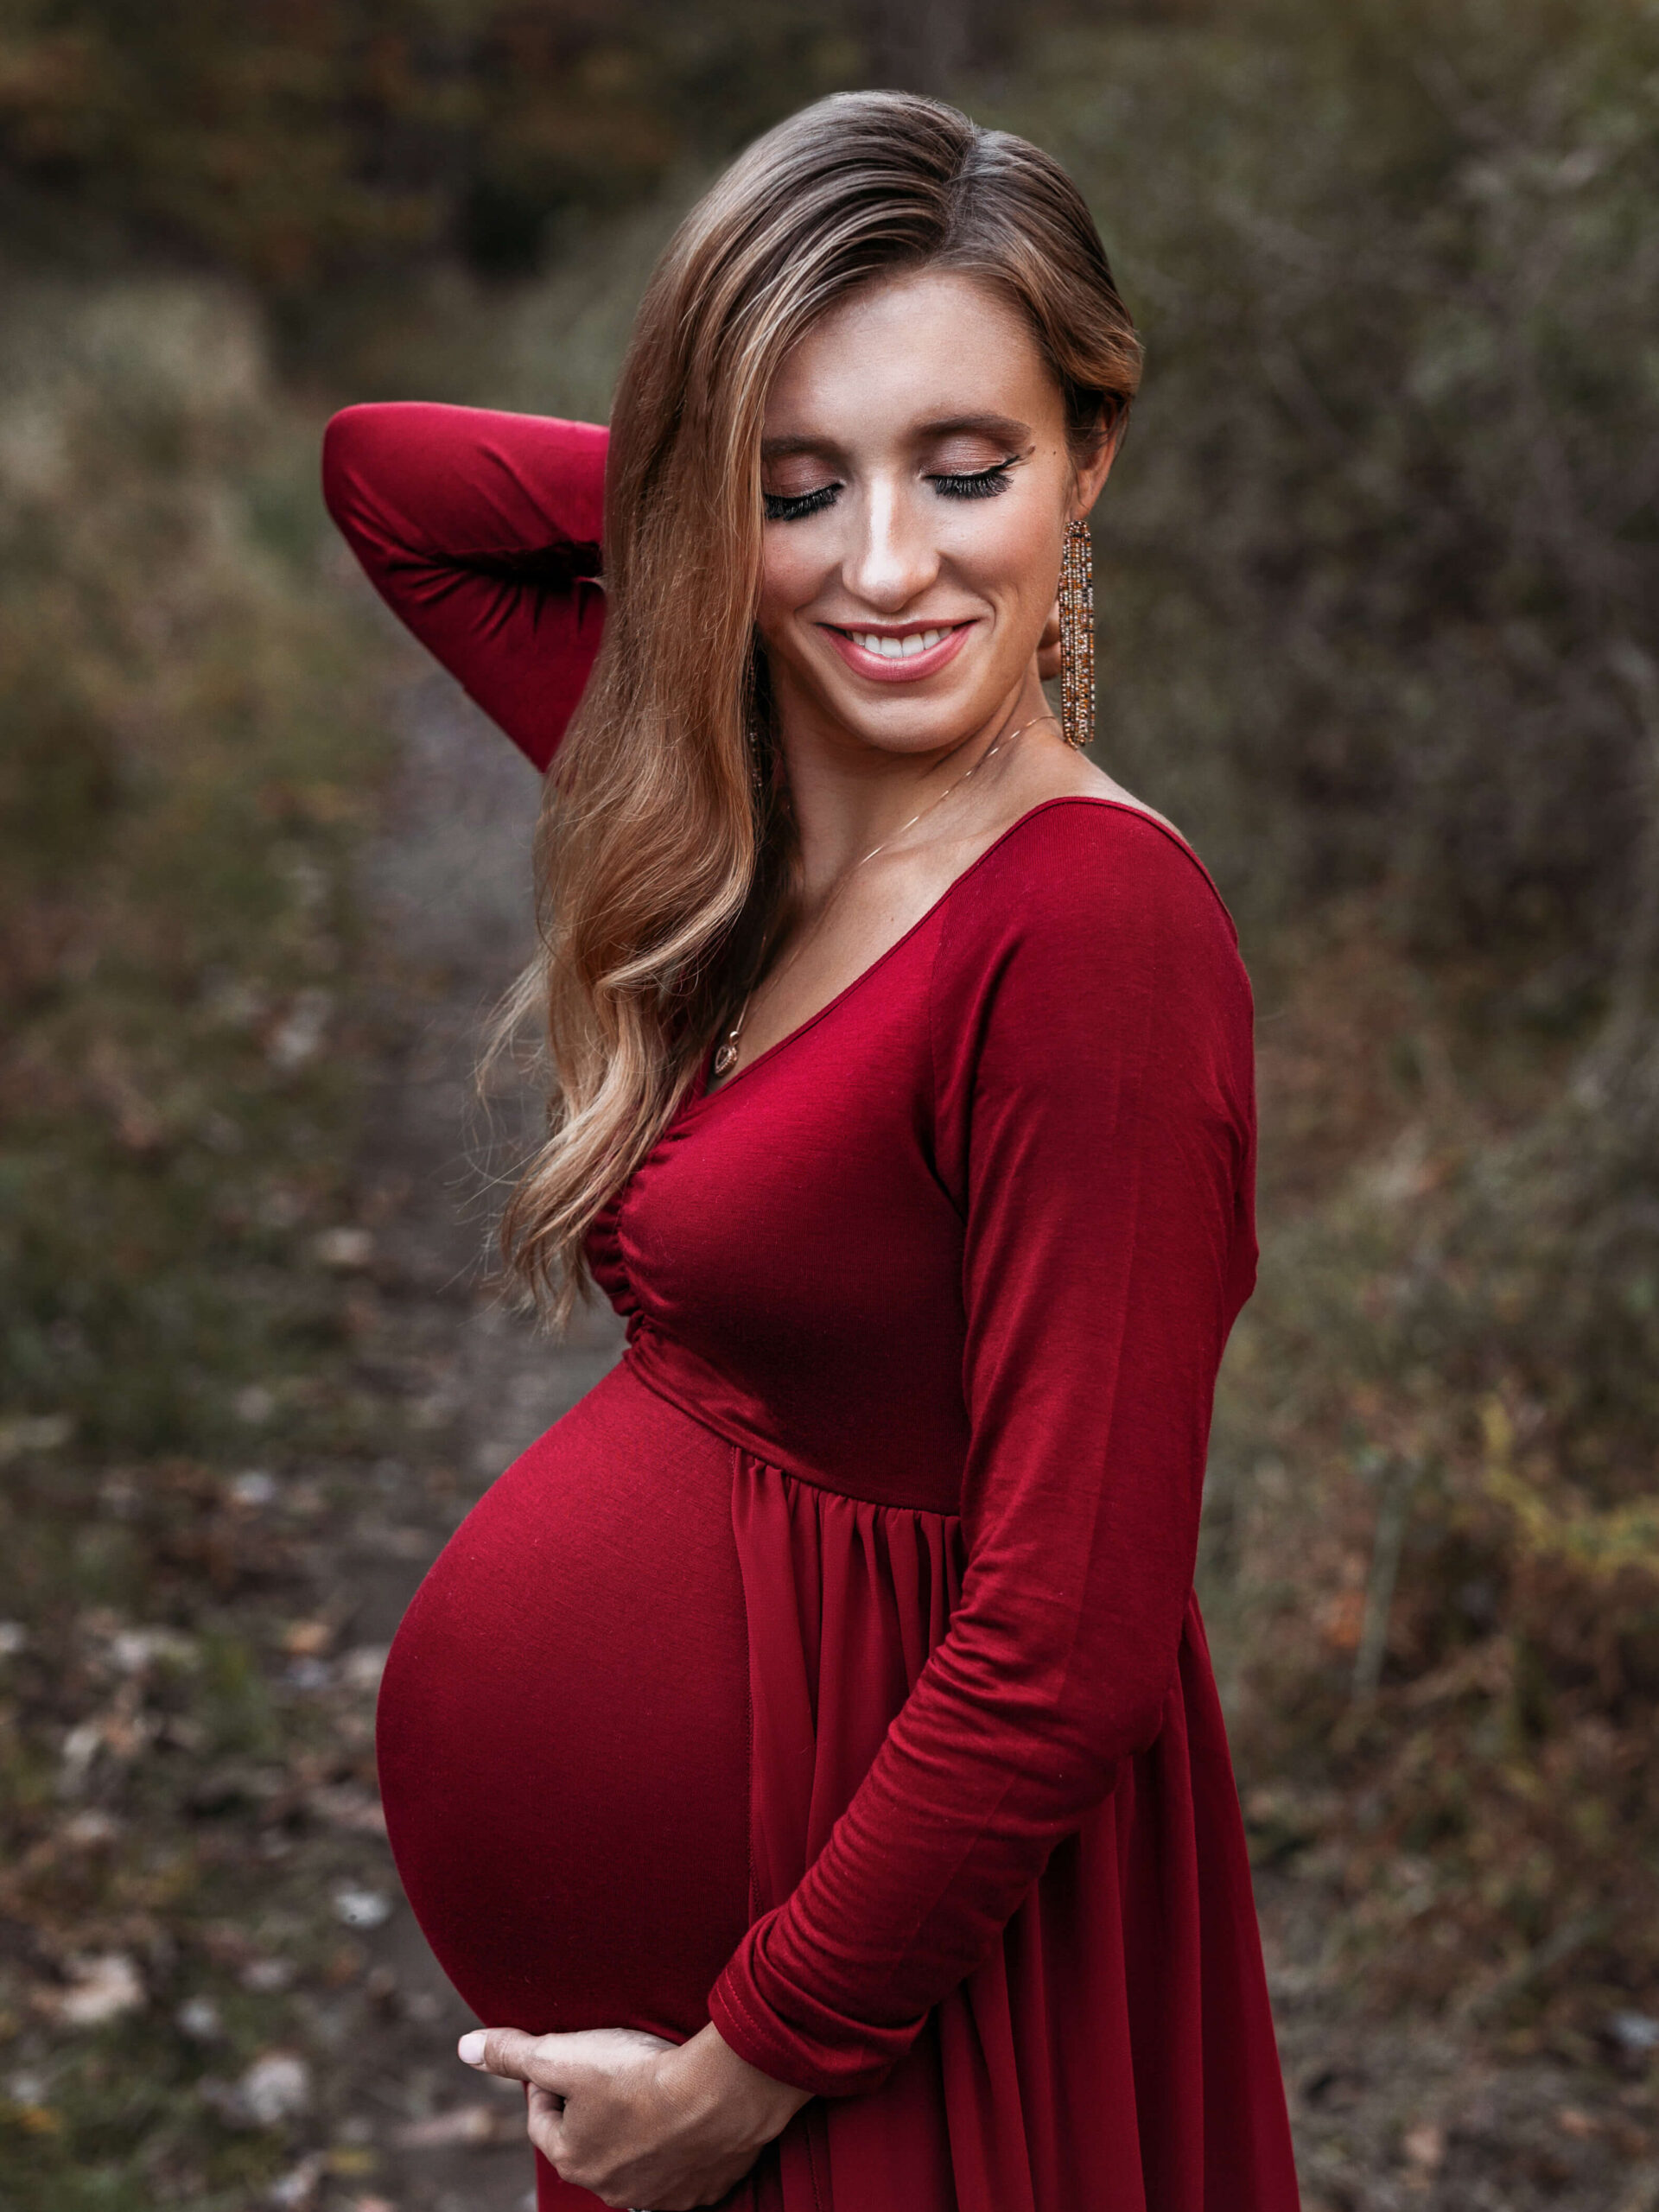  northern virginia pregnancy an maternity photographer capturing a pregnant woman posing in a red maternity gown in Great Falls Virginia a an outdoor park in the fall at dusk